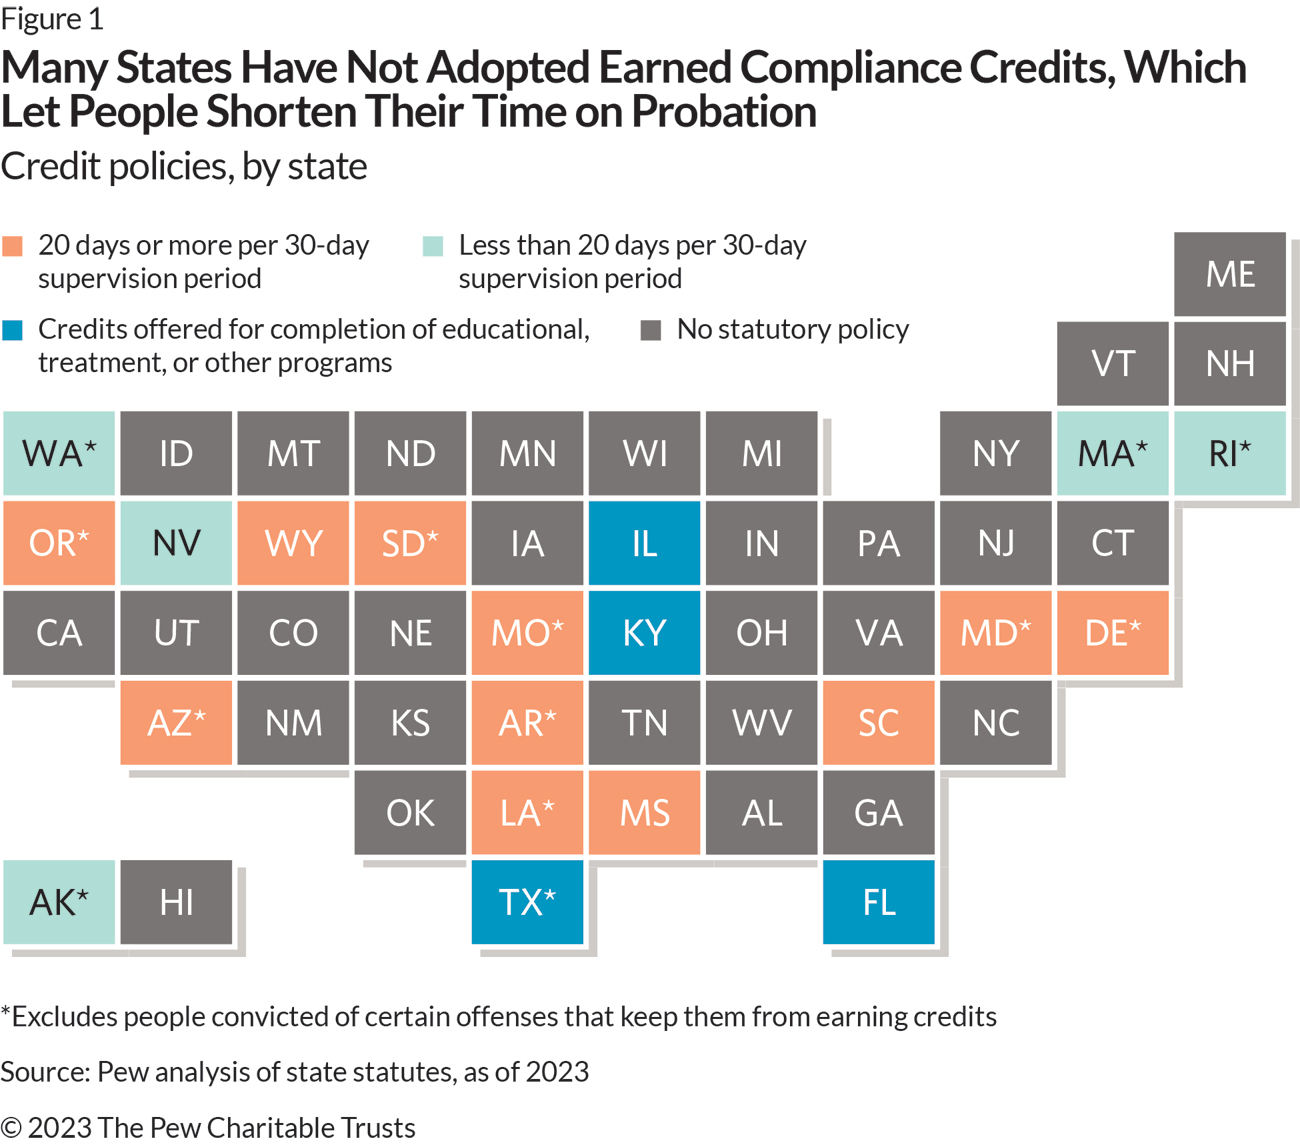 Many States Have Not Adopted Earned Compliance Credits, Which Let People Shorten Their Time on Probation 